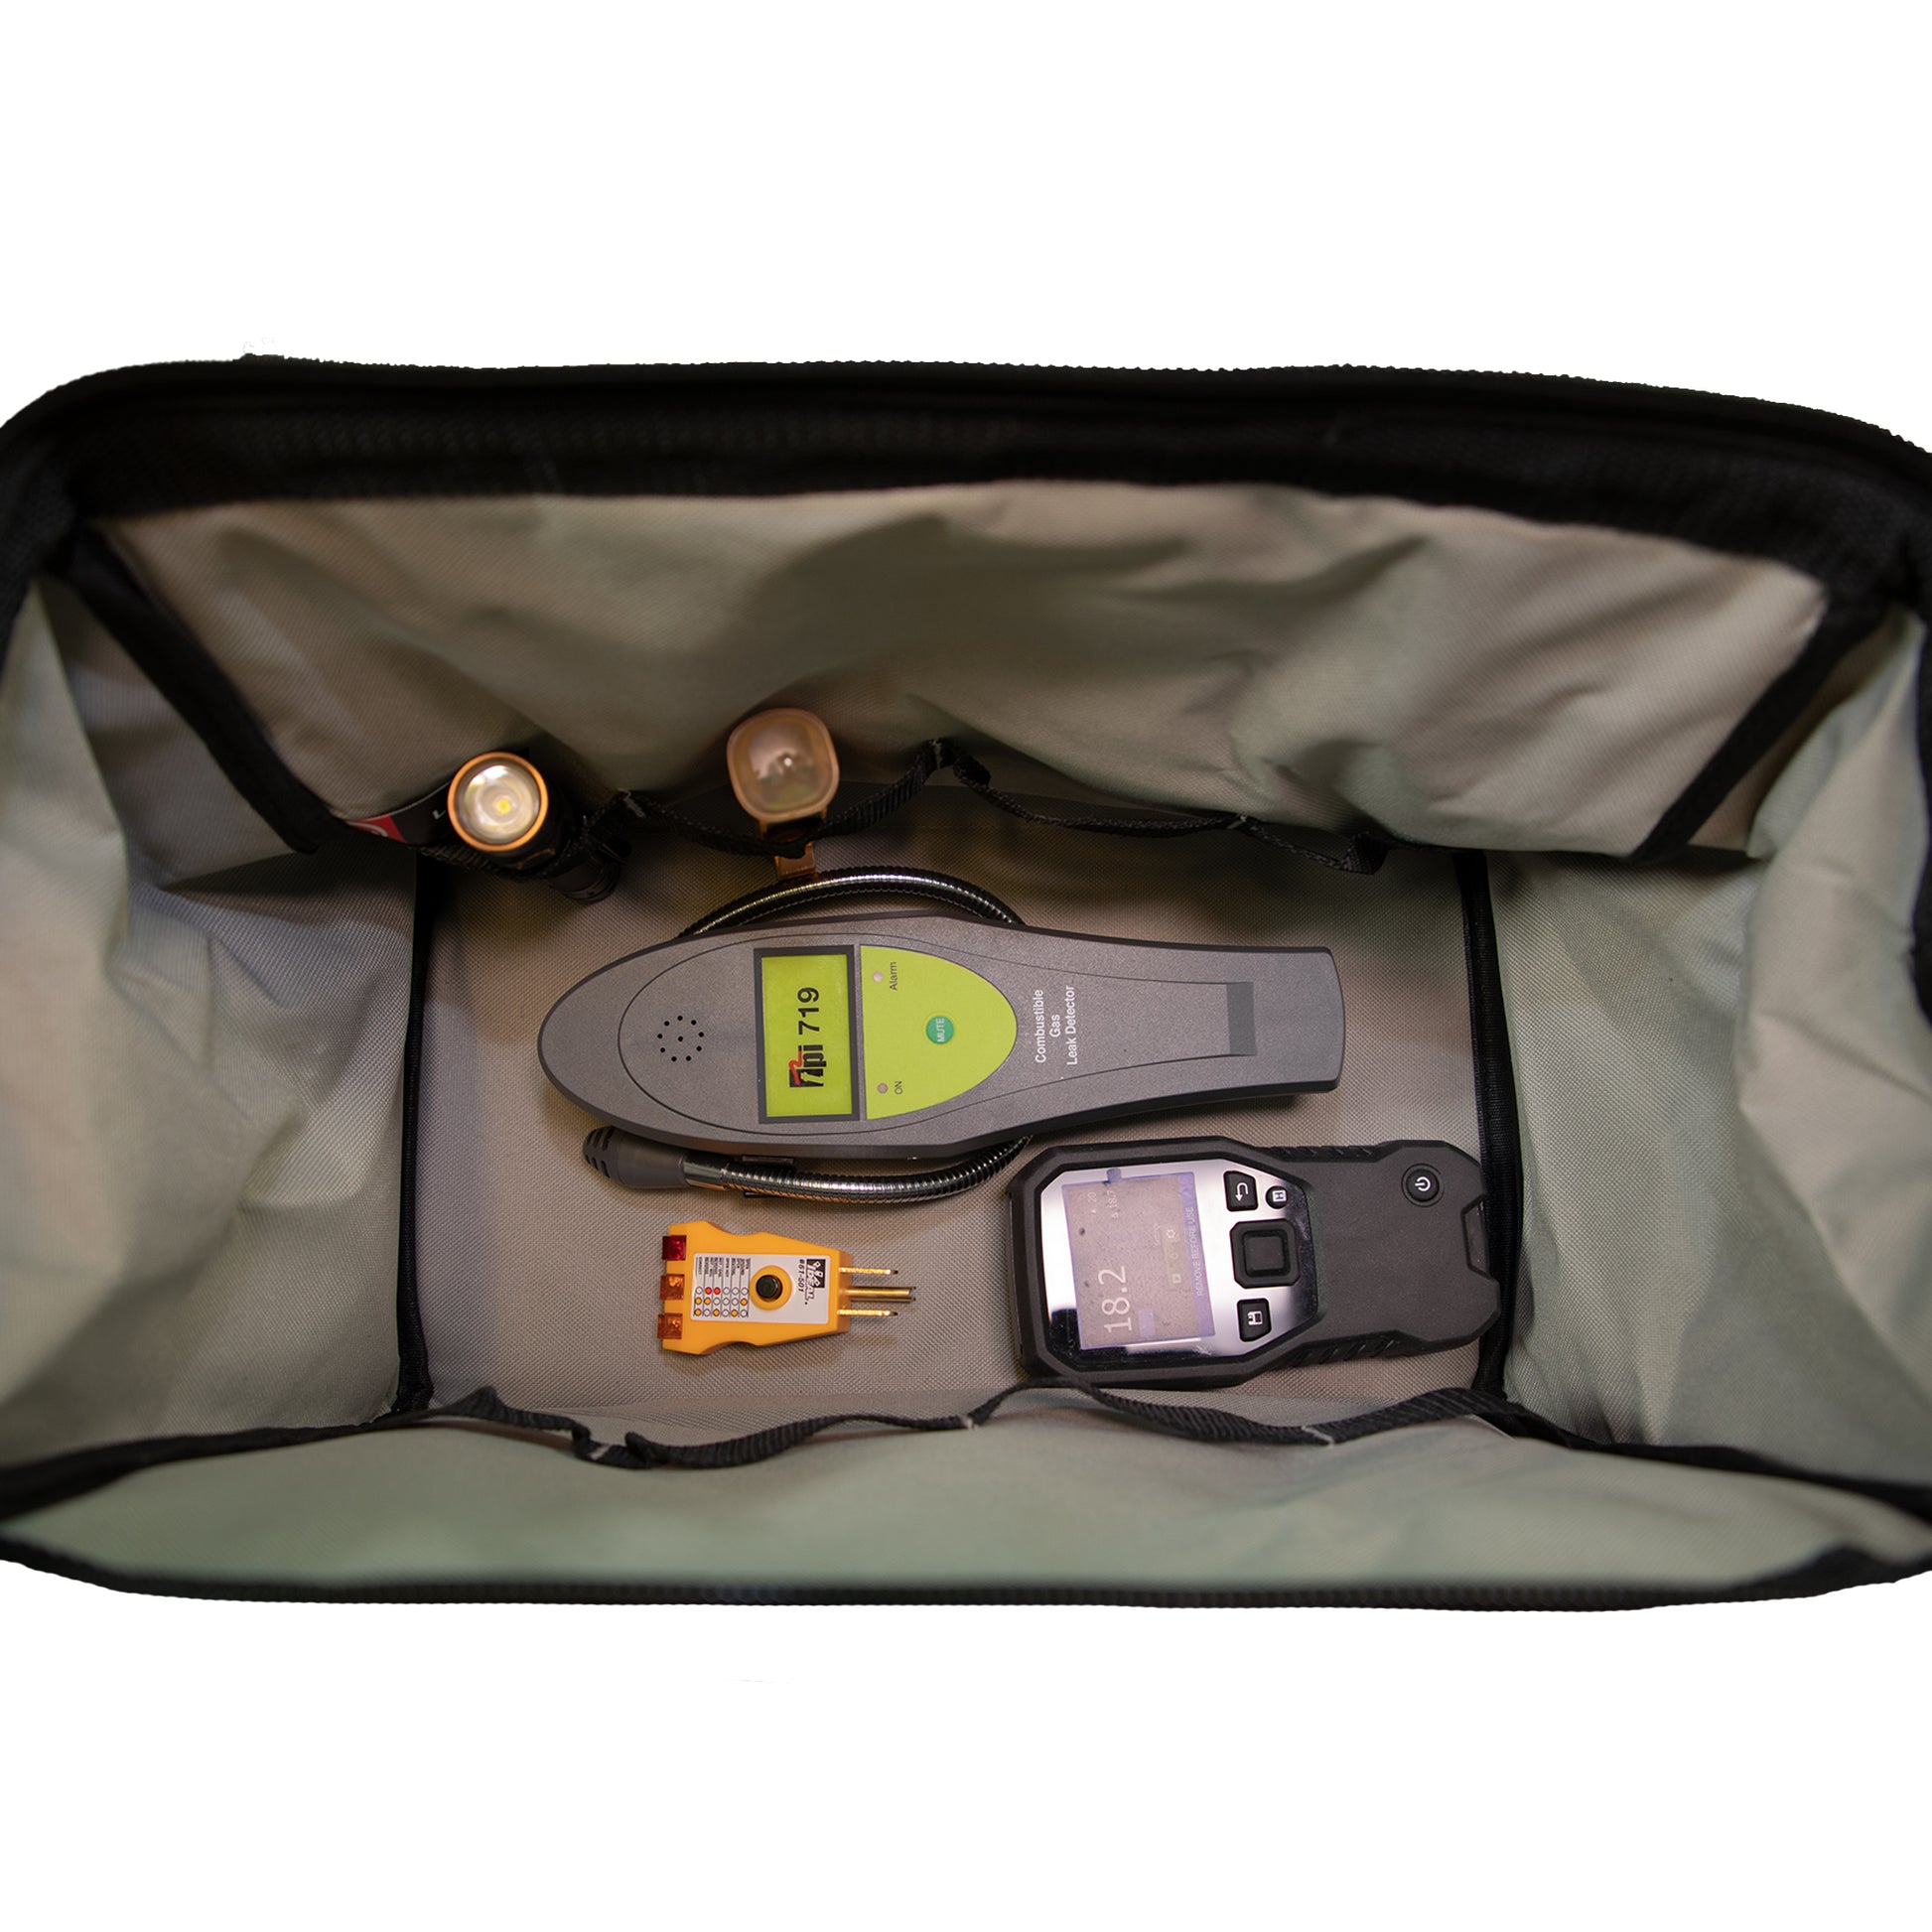 Home Inspection Tool Kit - Deluxe